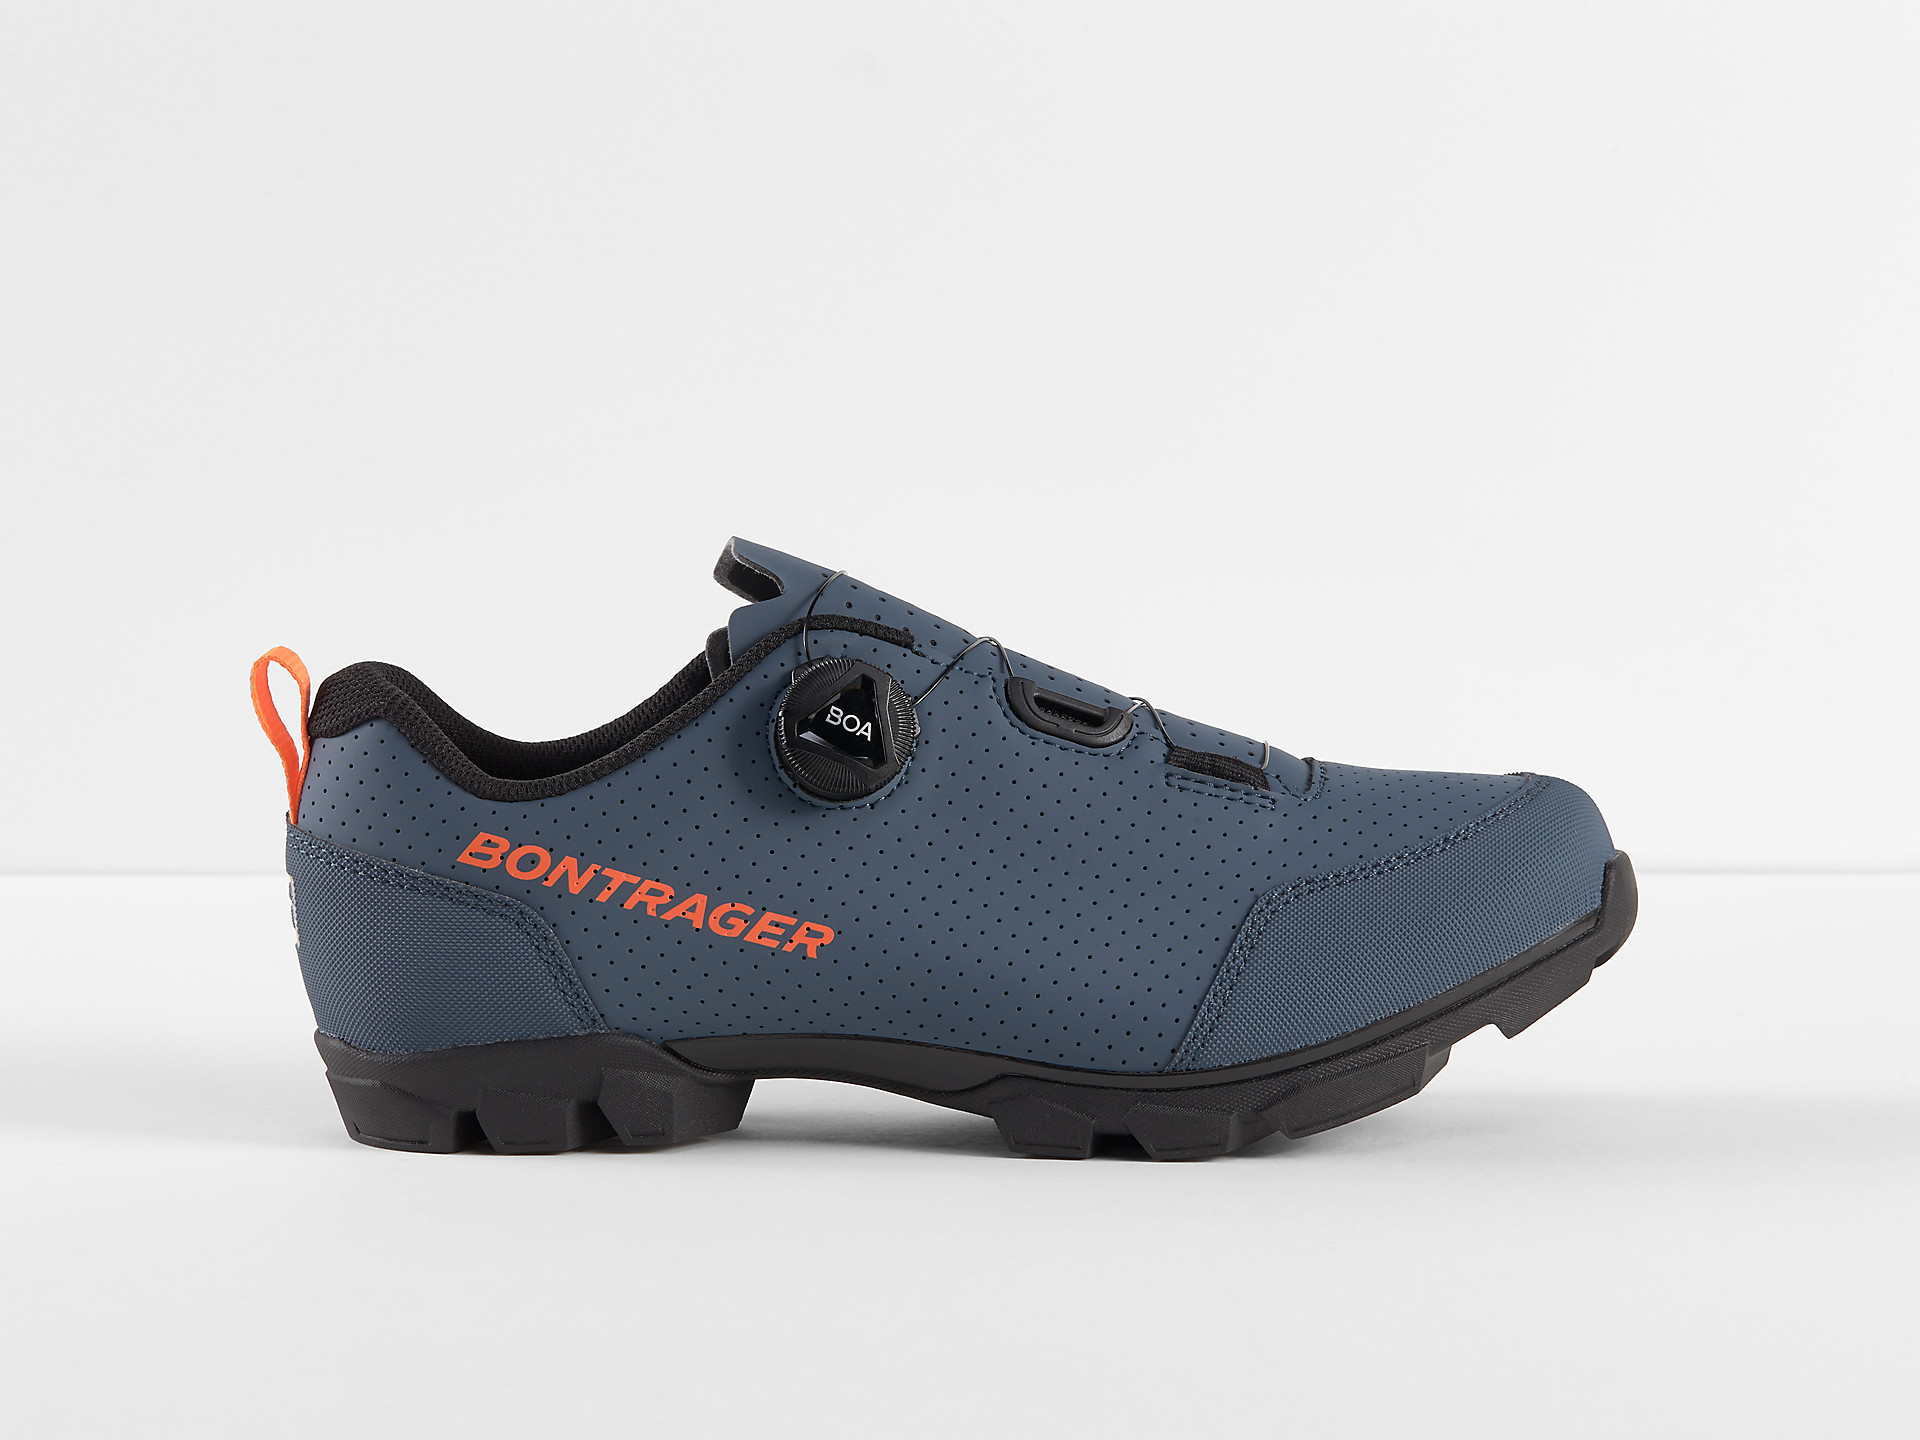 <a href="https://cycles-clement.be/product/bont-chaussures-evoke-42-black/">BONT CHAUSSURES EVOKE 42 BLACK</a>